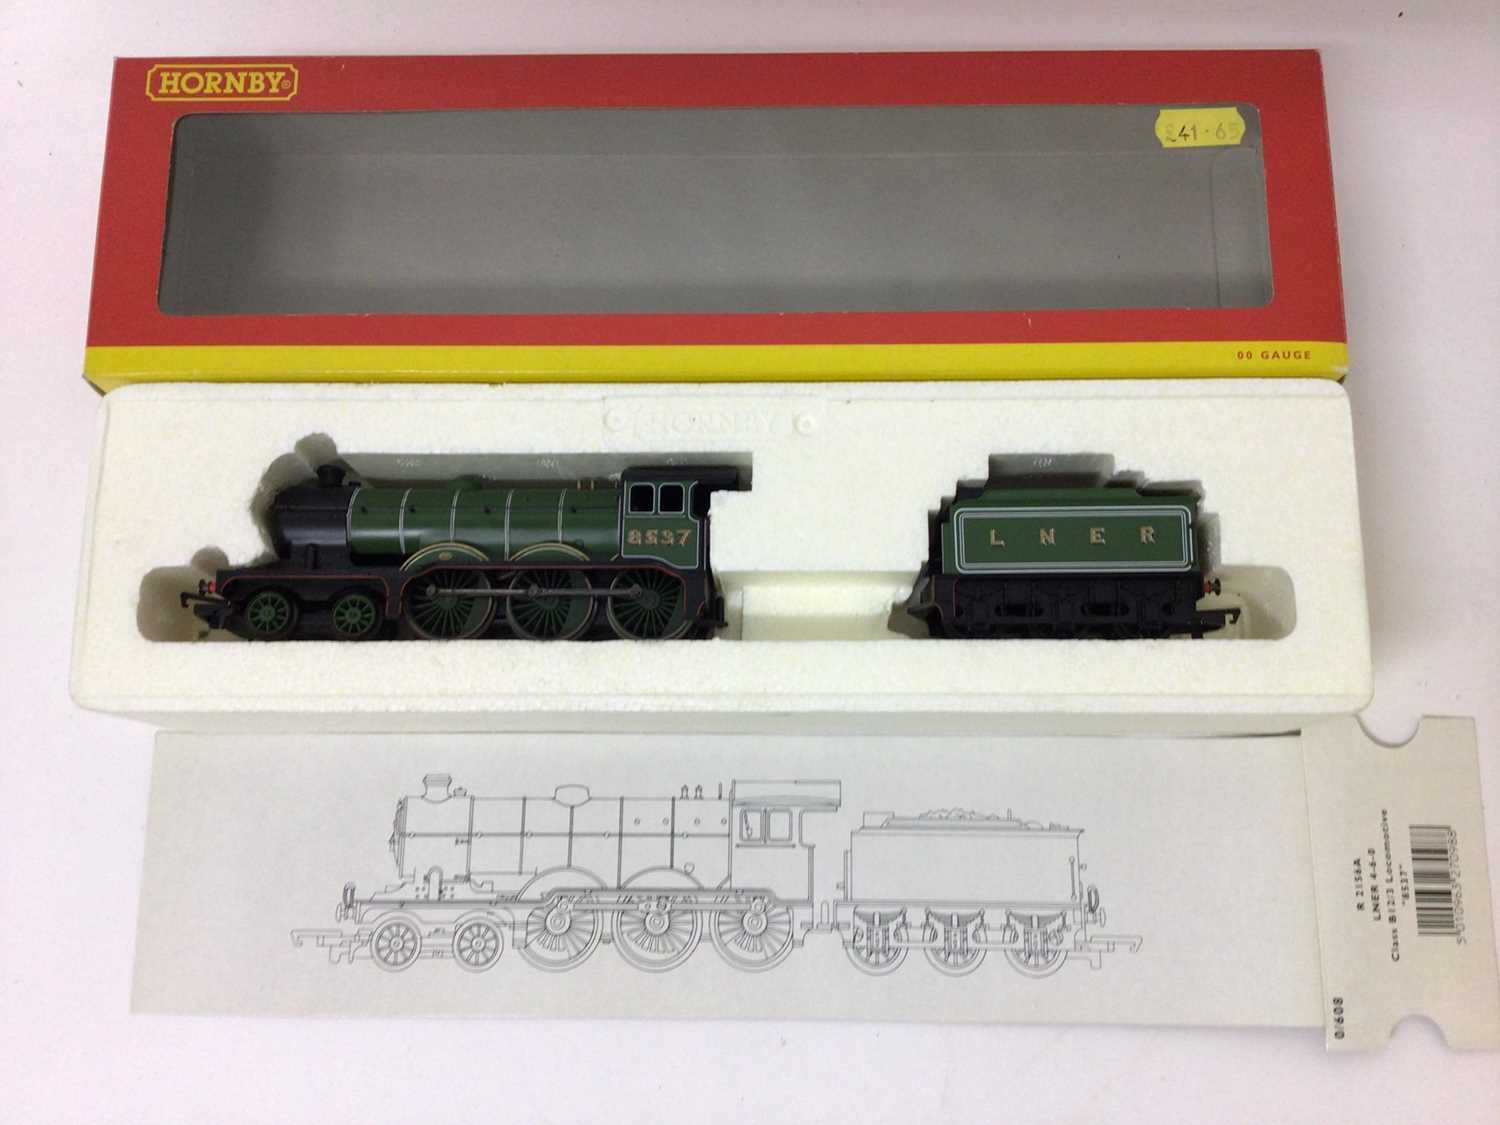 Lot 28 - Hornby OO gauge locomotives LMS 0-6-0 Class 4F Fowler locomotive '4418' R2193, LMS Fowler 0-6-0 Class 4F '4312' R3030, LNER 4-6-0 Class B12/3 locomotive '8537' R2156A all boxed (3)